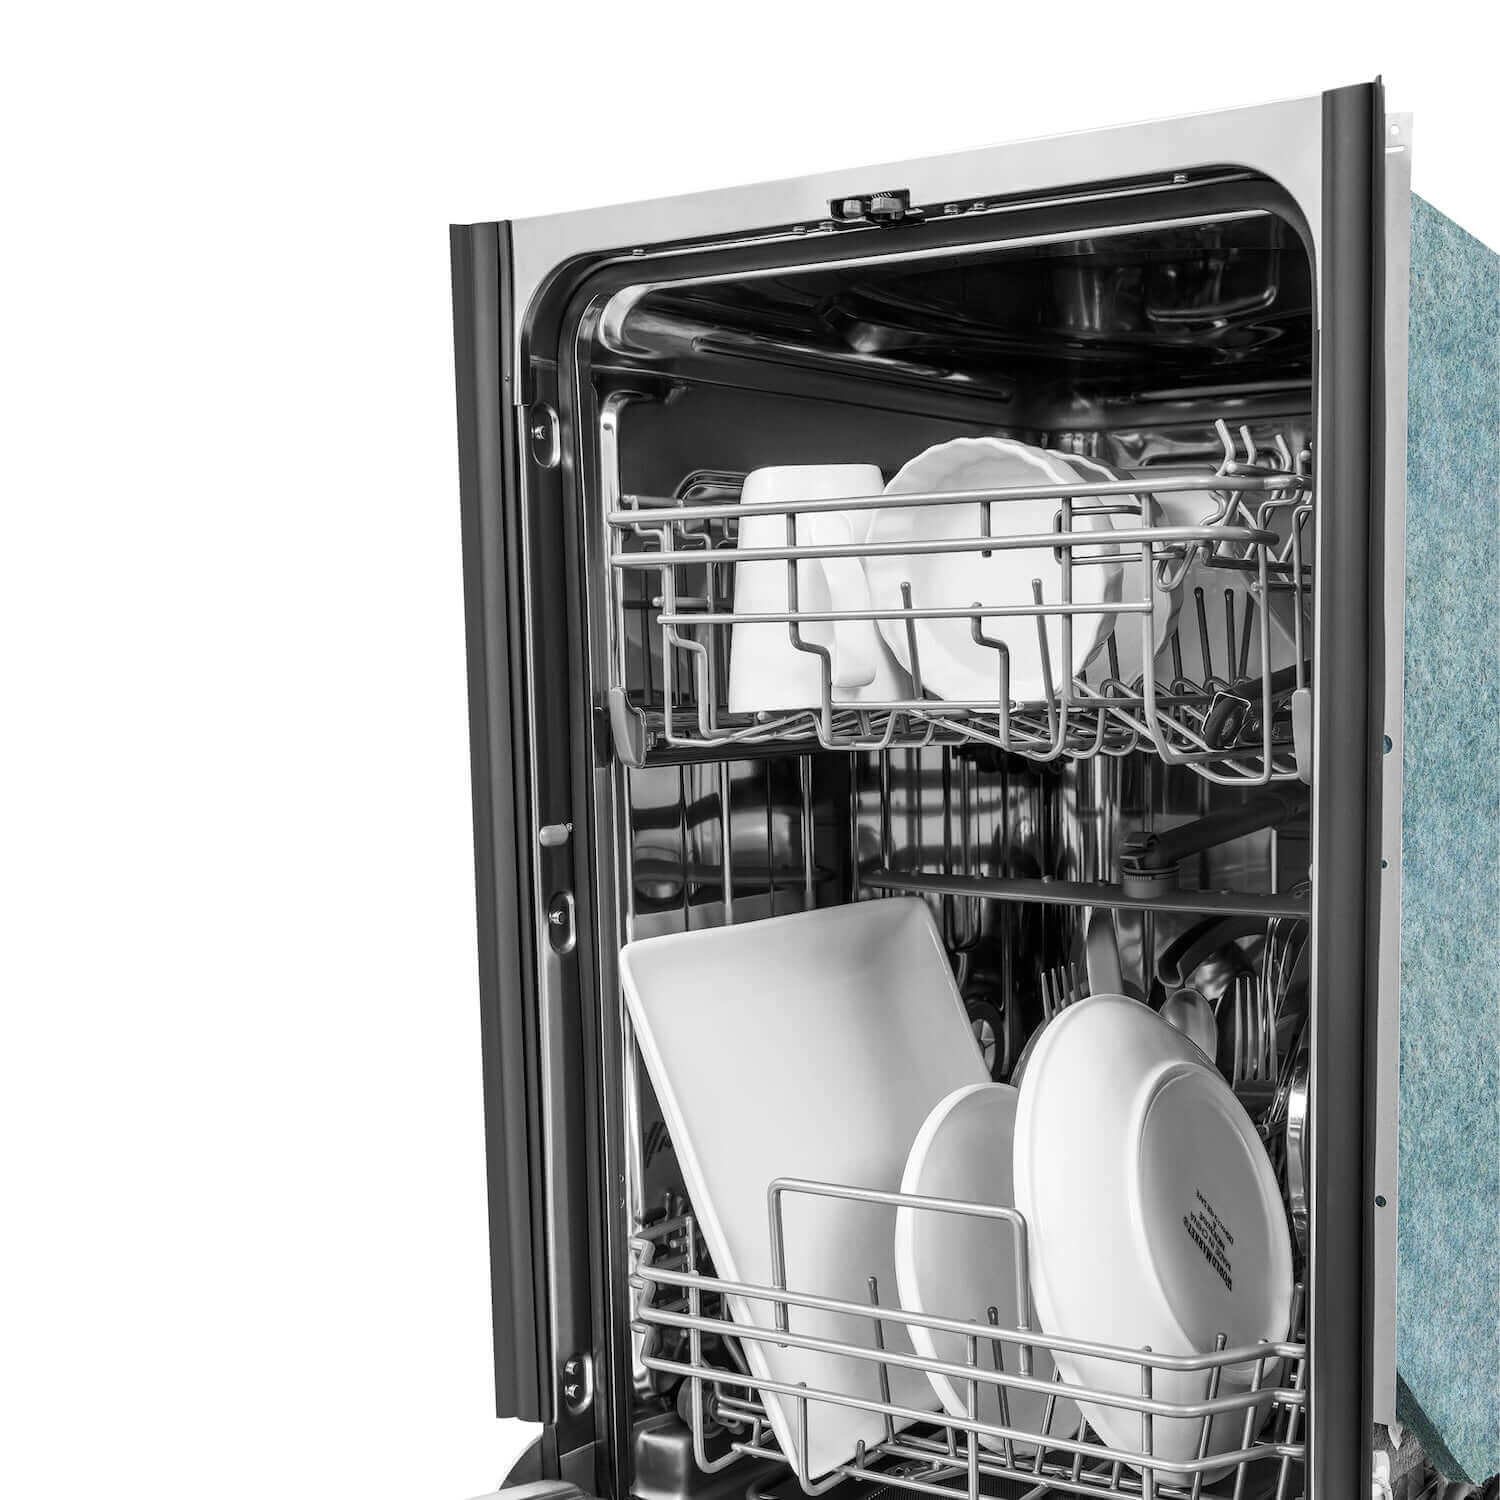 Dishes loaded on racks of ZLINE 18 in. Compact Top Control Dishwasher.